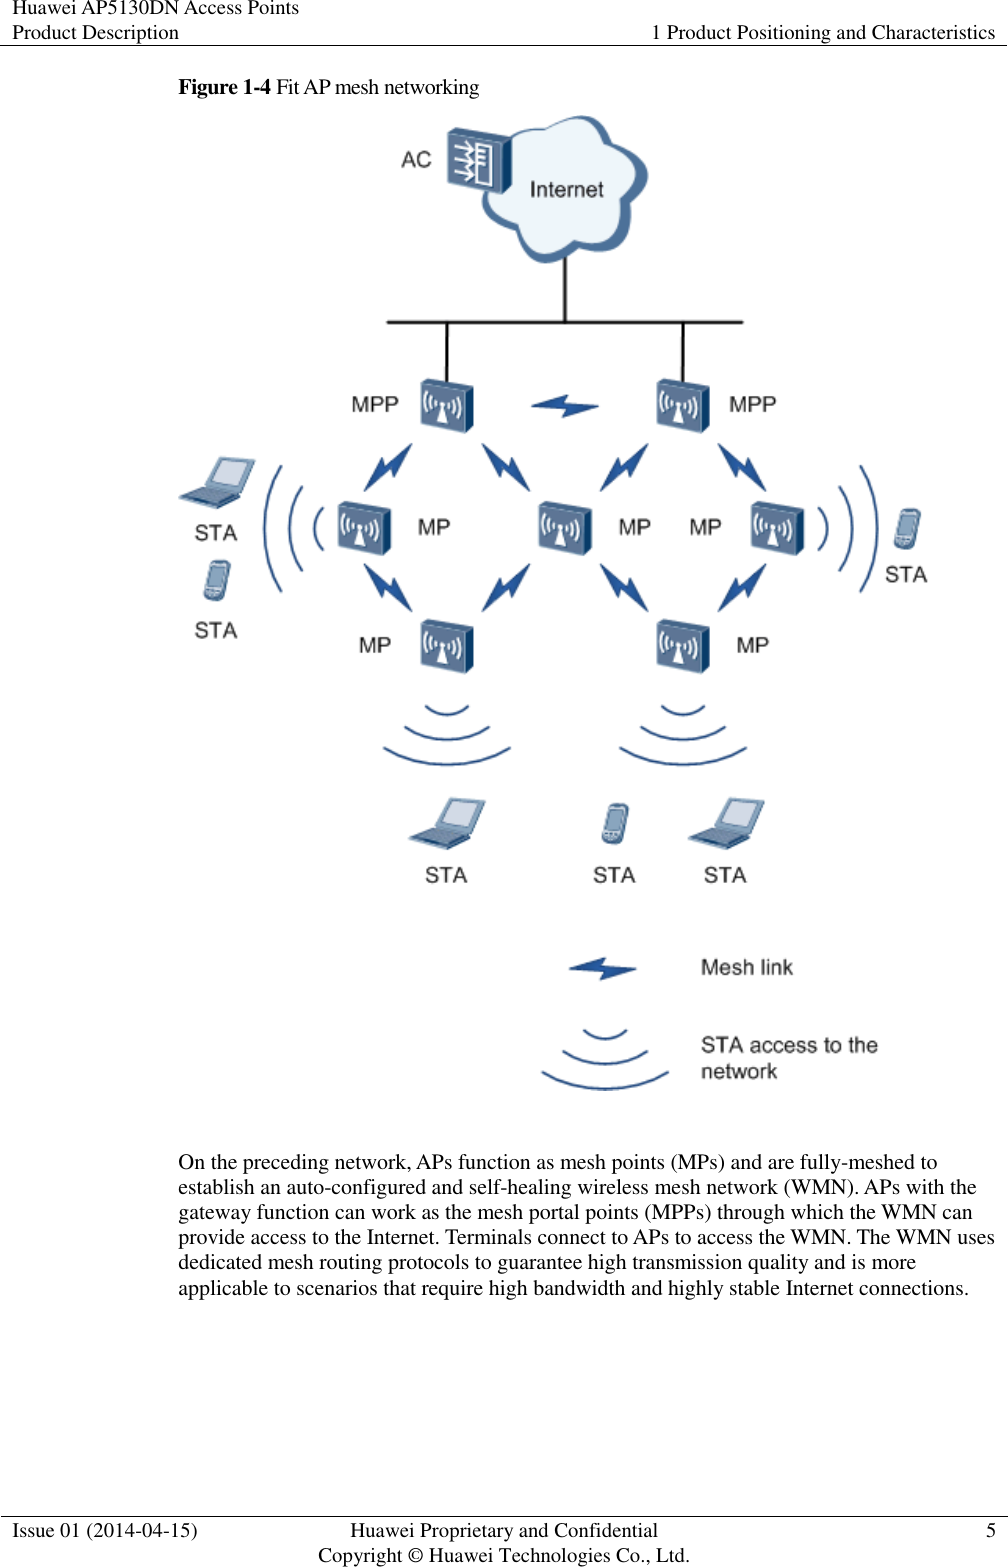 Huawei AP5130DN Access Points Product Description 1 Product Positioning and Characteristics  Issue 01 (2014-04-15) Huawei Proprietary and Confidential                                     Copyright © Huawei Technologies Co., Ltd. 5  Figure 1-4 Fit AP mesh networking   On the preceding network, APs function as mesh points (MPs) and are fully-meshed to establish an auto-configured and self-healing wireless mesh network (WMN). APs with the gateway function can work as the mesh portal points (MPPs) through which the WMN can provide access to the Internet. Terminals connect to APs to access the WMN. The WMN uses dedicated mesh routing protocols to guarantee high transmission quality and is more applicable to scenarios that require high bandwidth and highly stable Internet connections. 